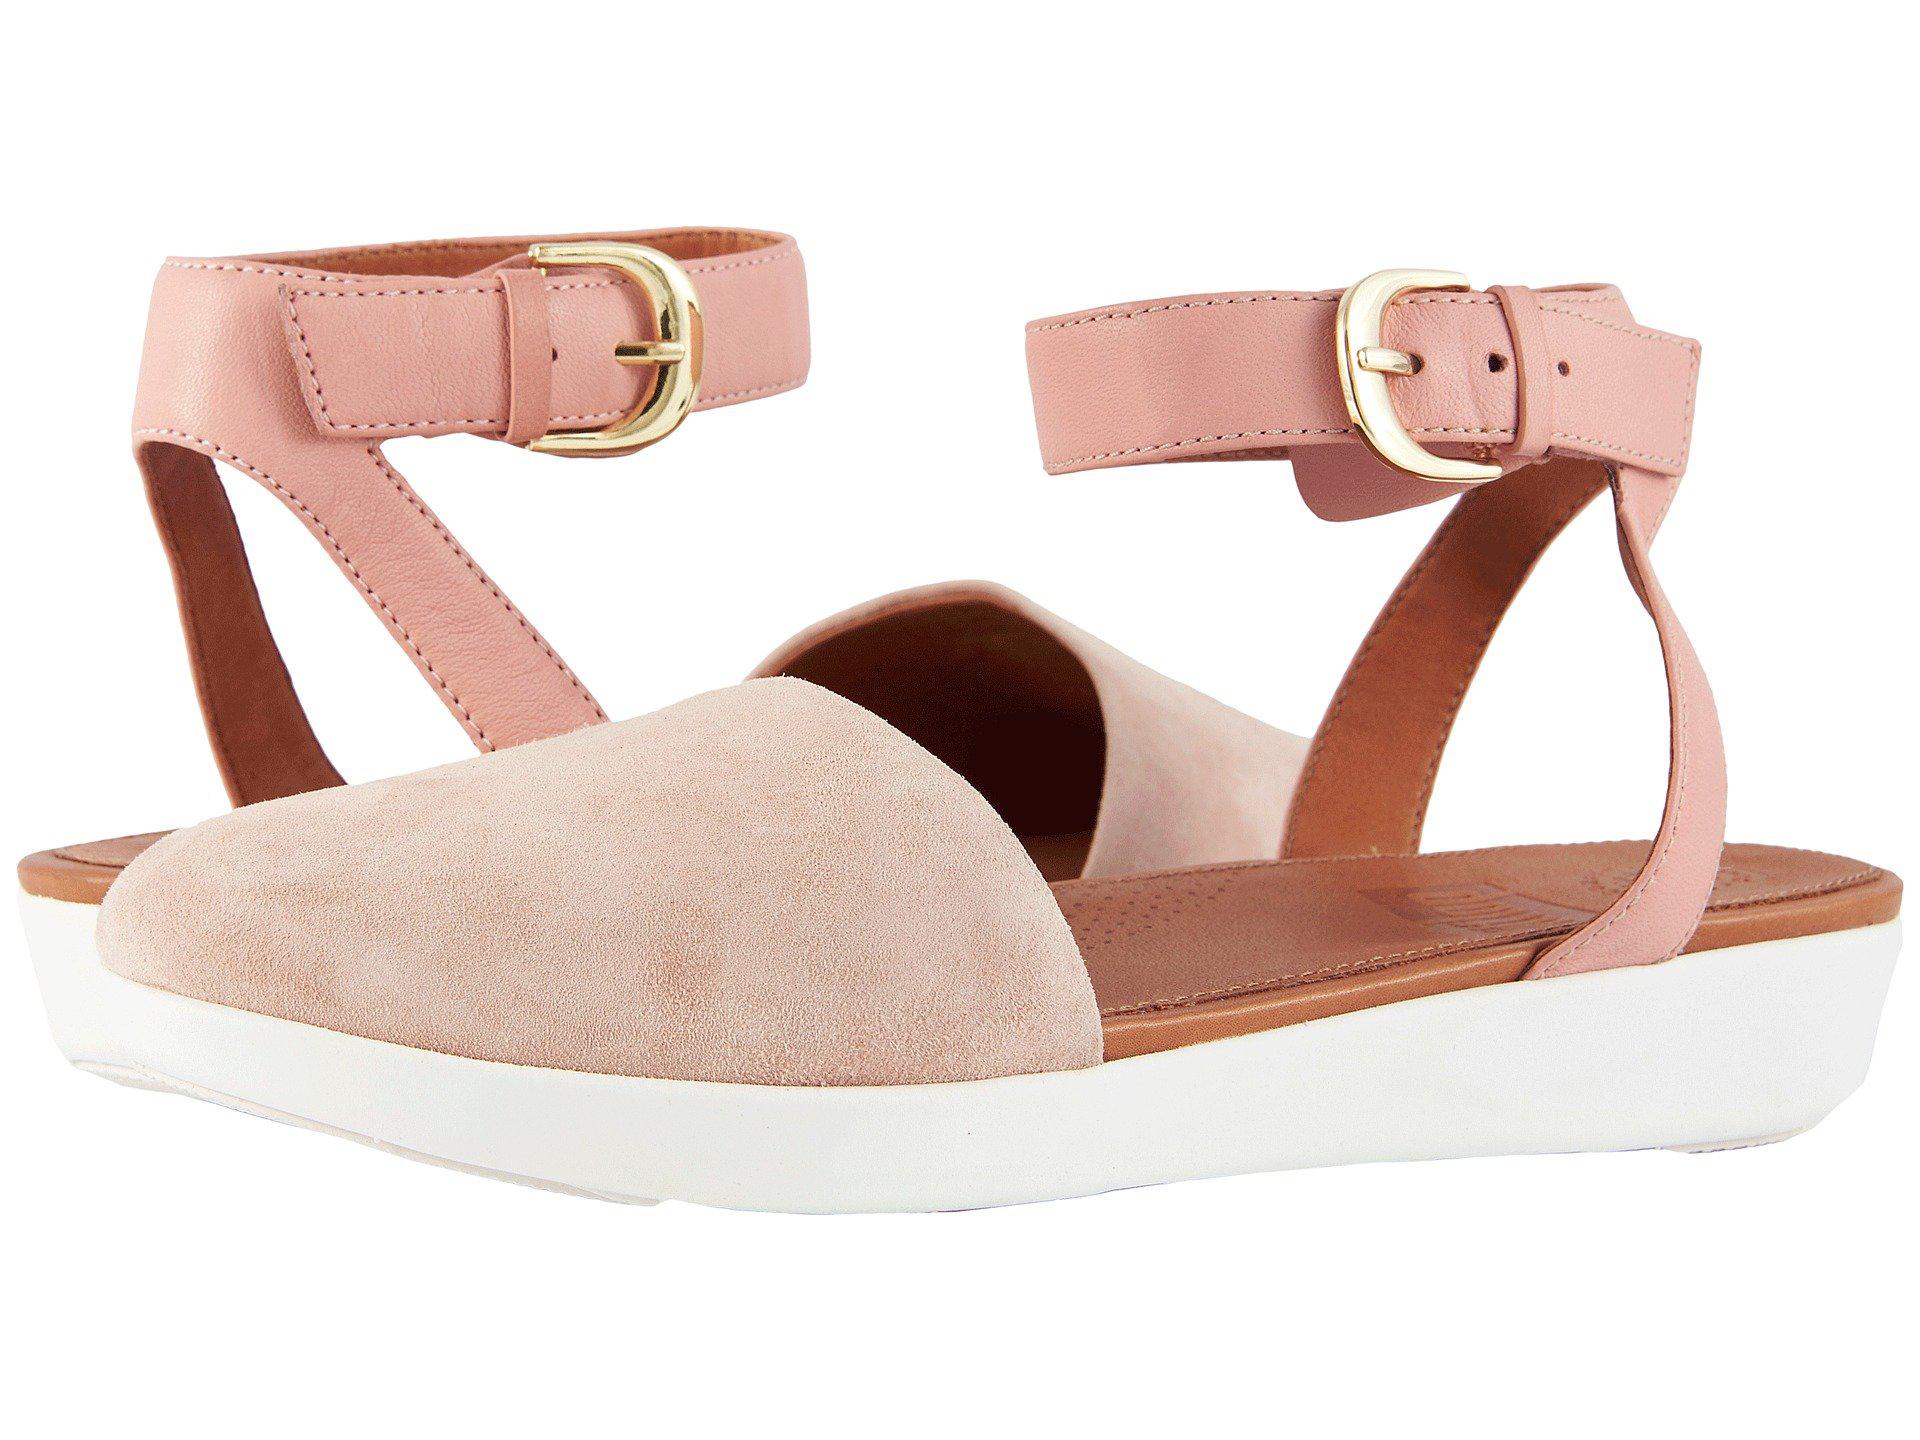 fitflop closed toe sandals